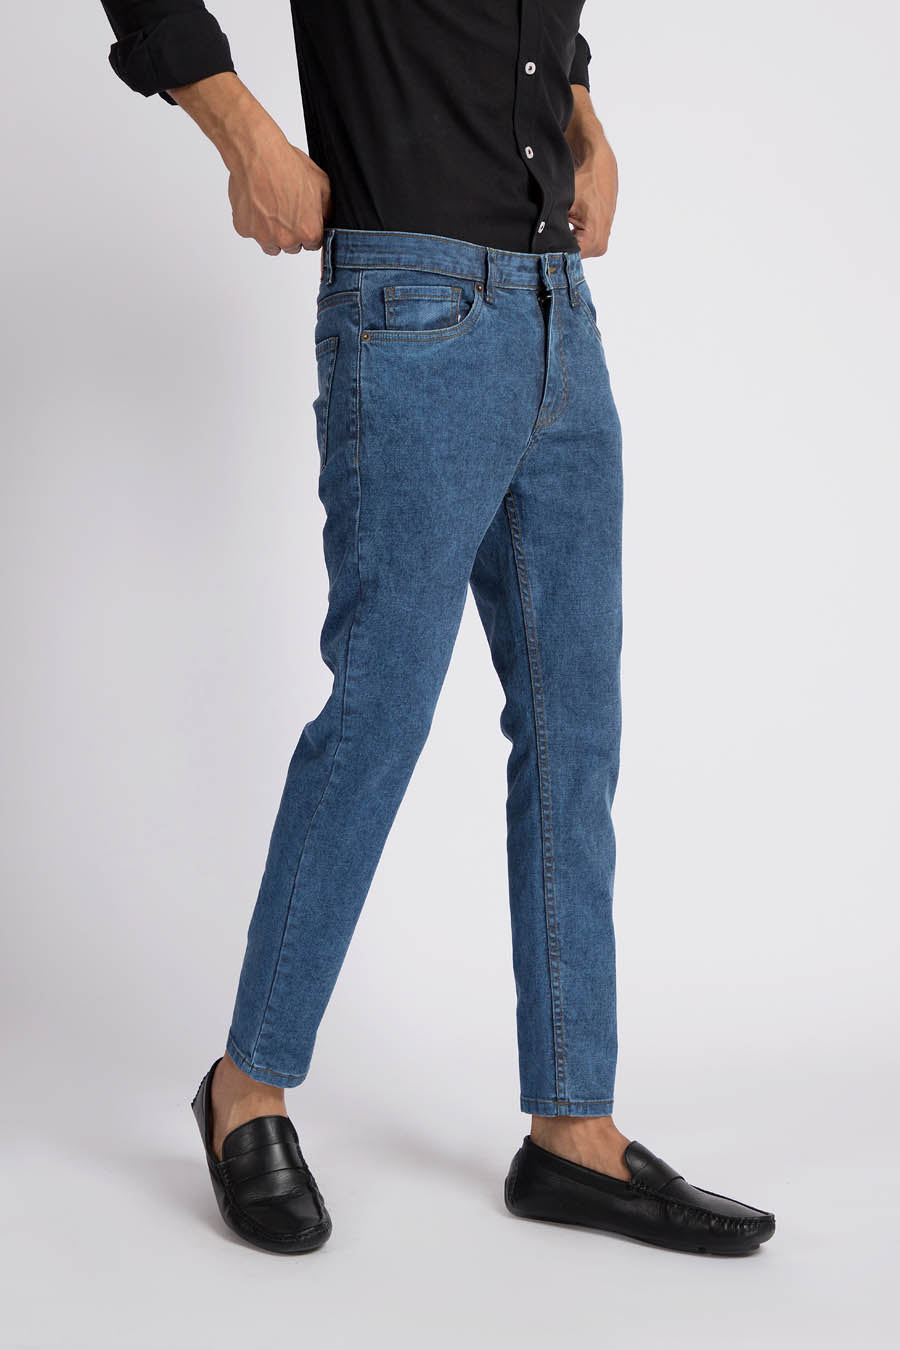 Blue Carrot Fit Jeans